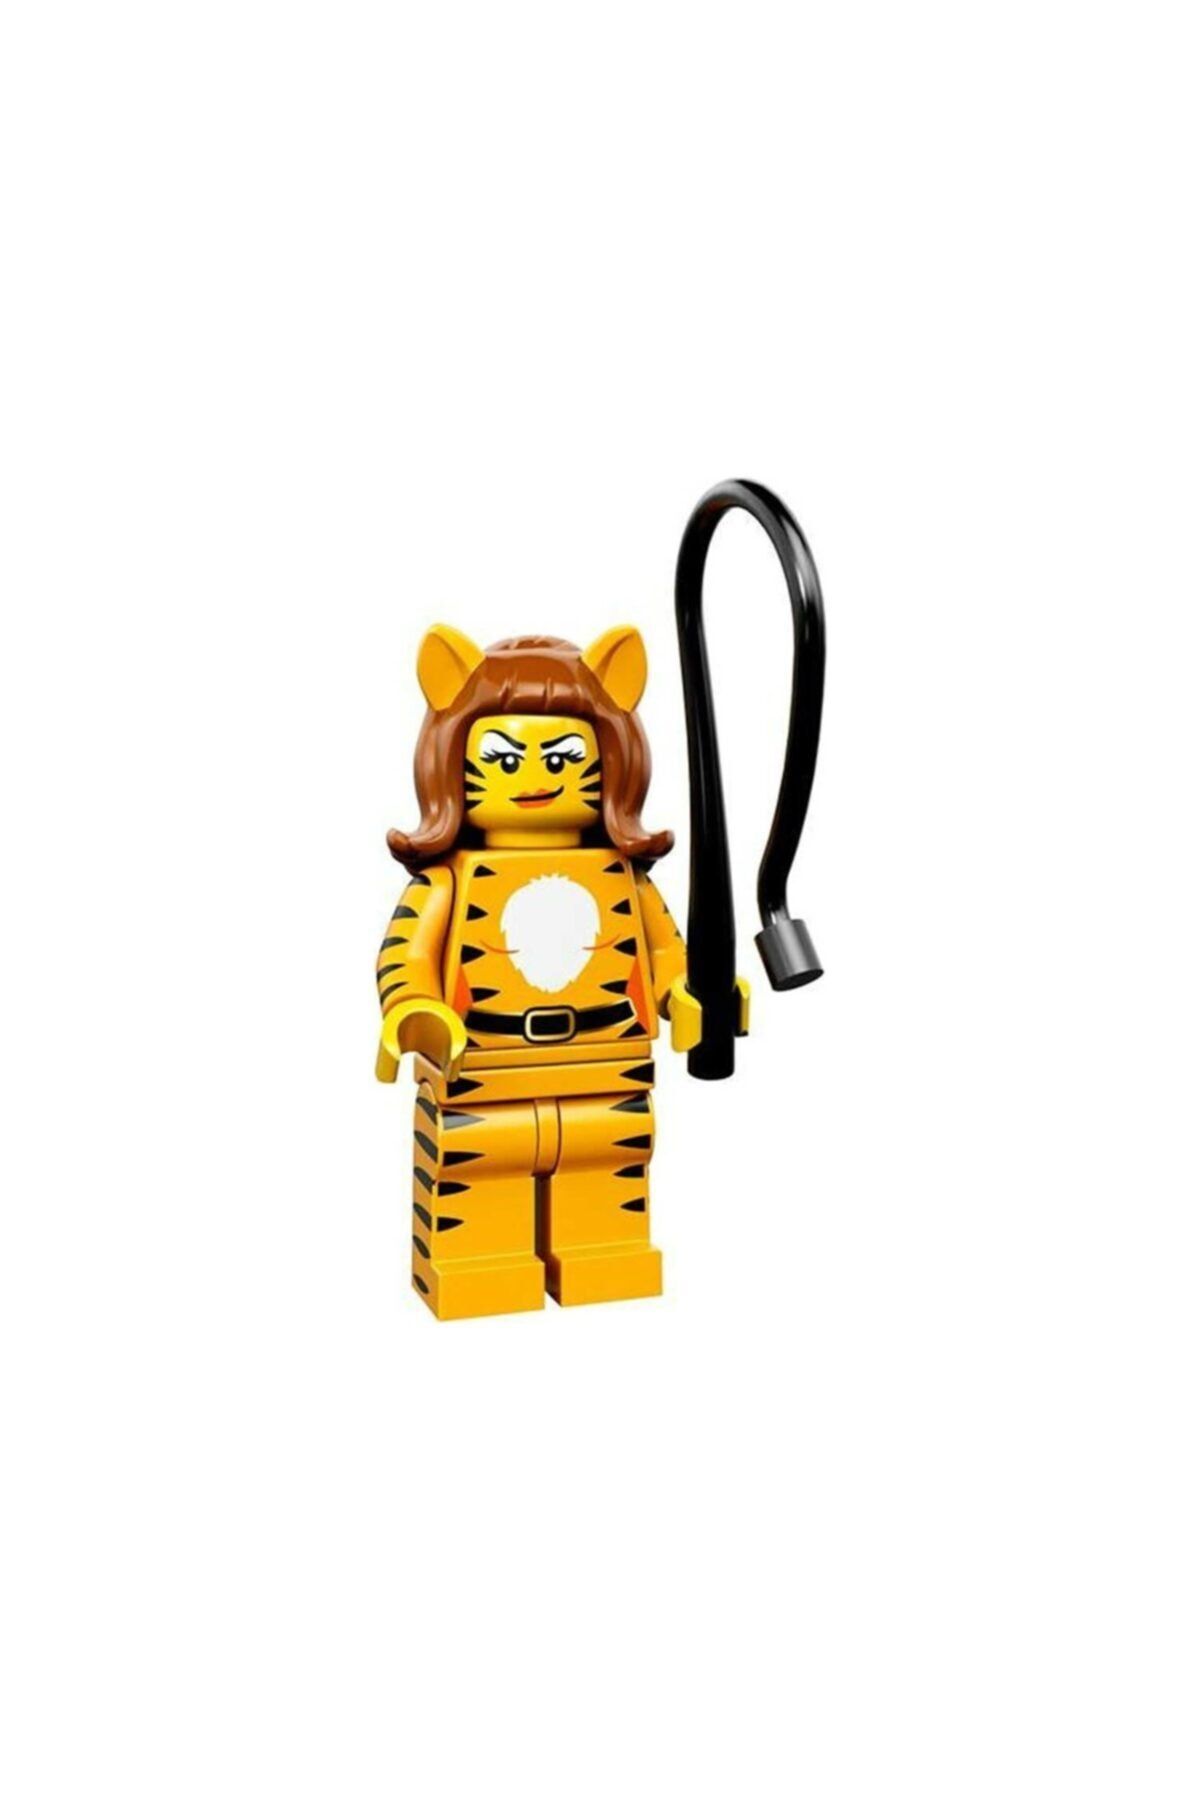 LEGO Minifigure 71010 - Series 14 Monsters Tiger Woman